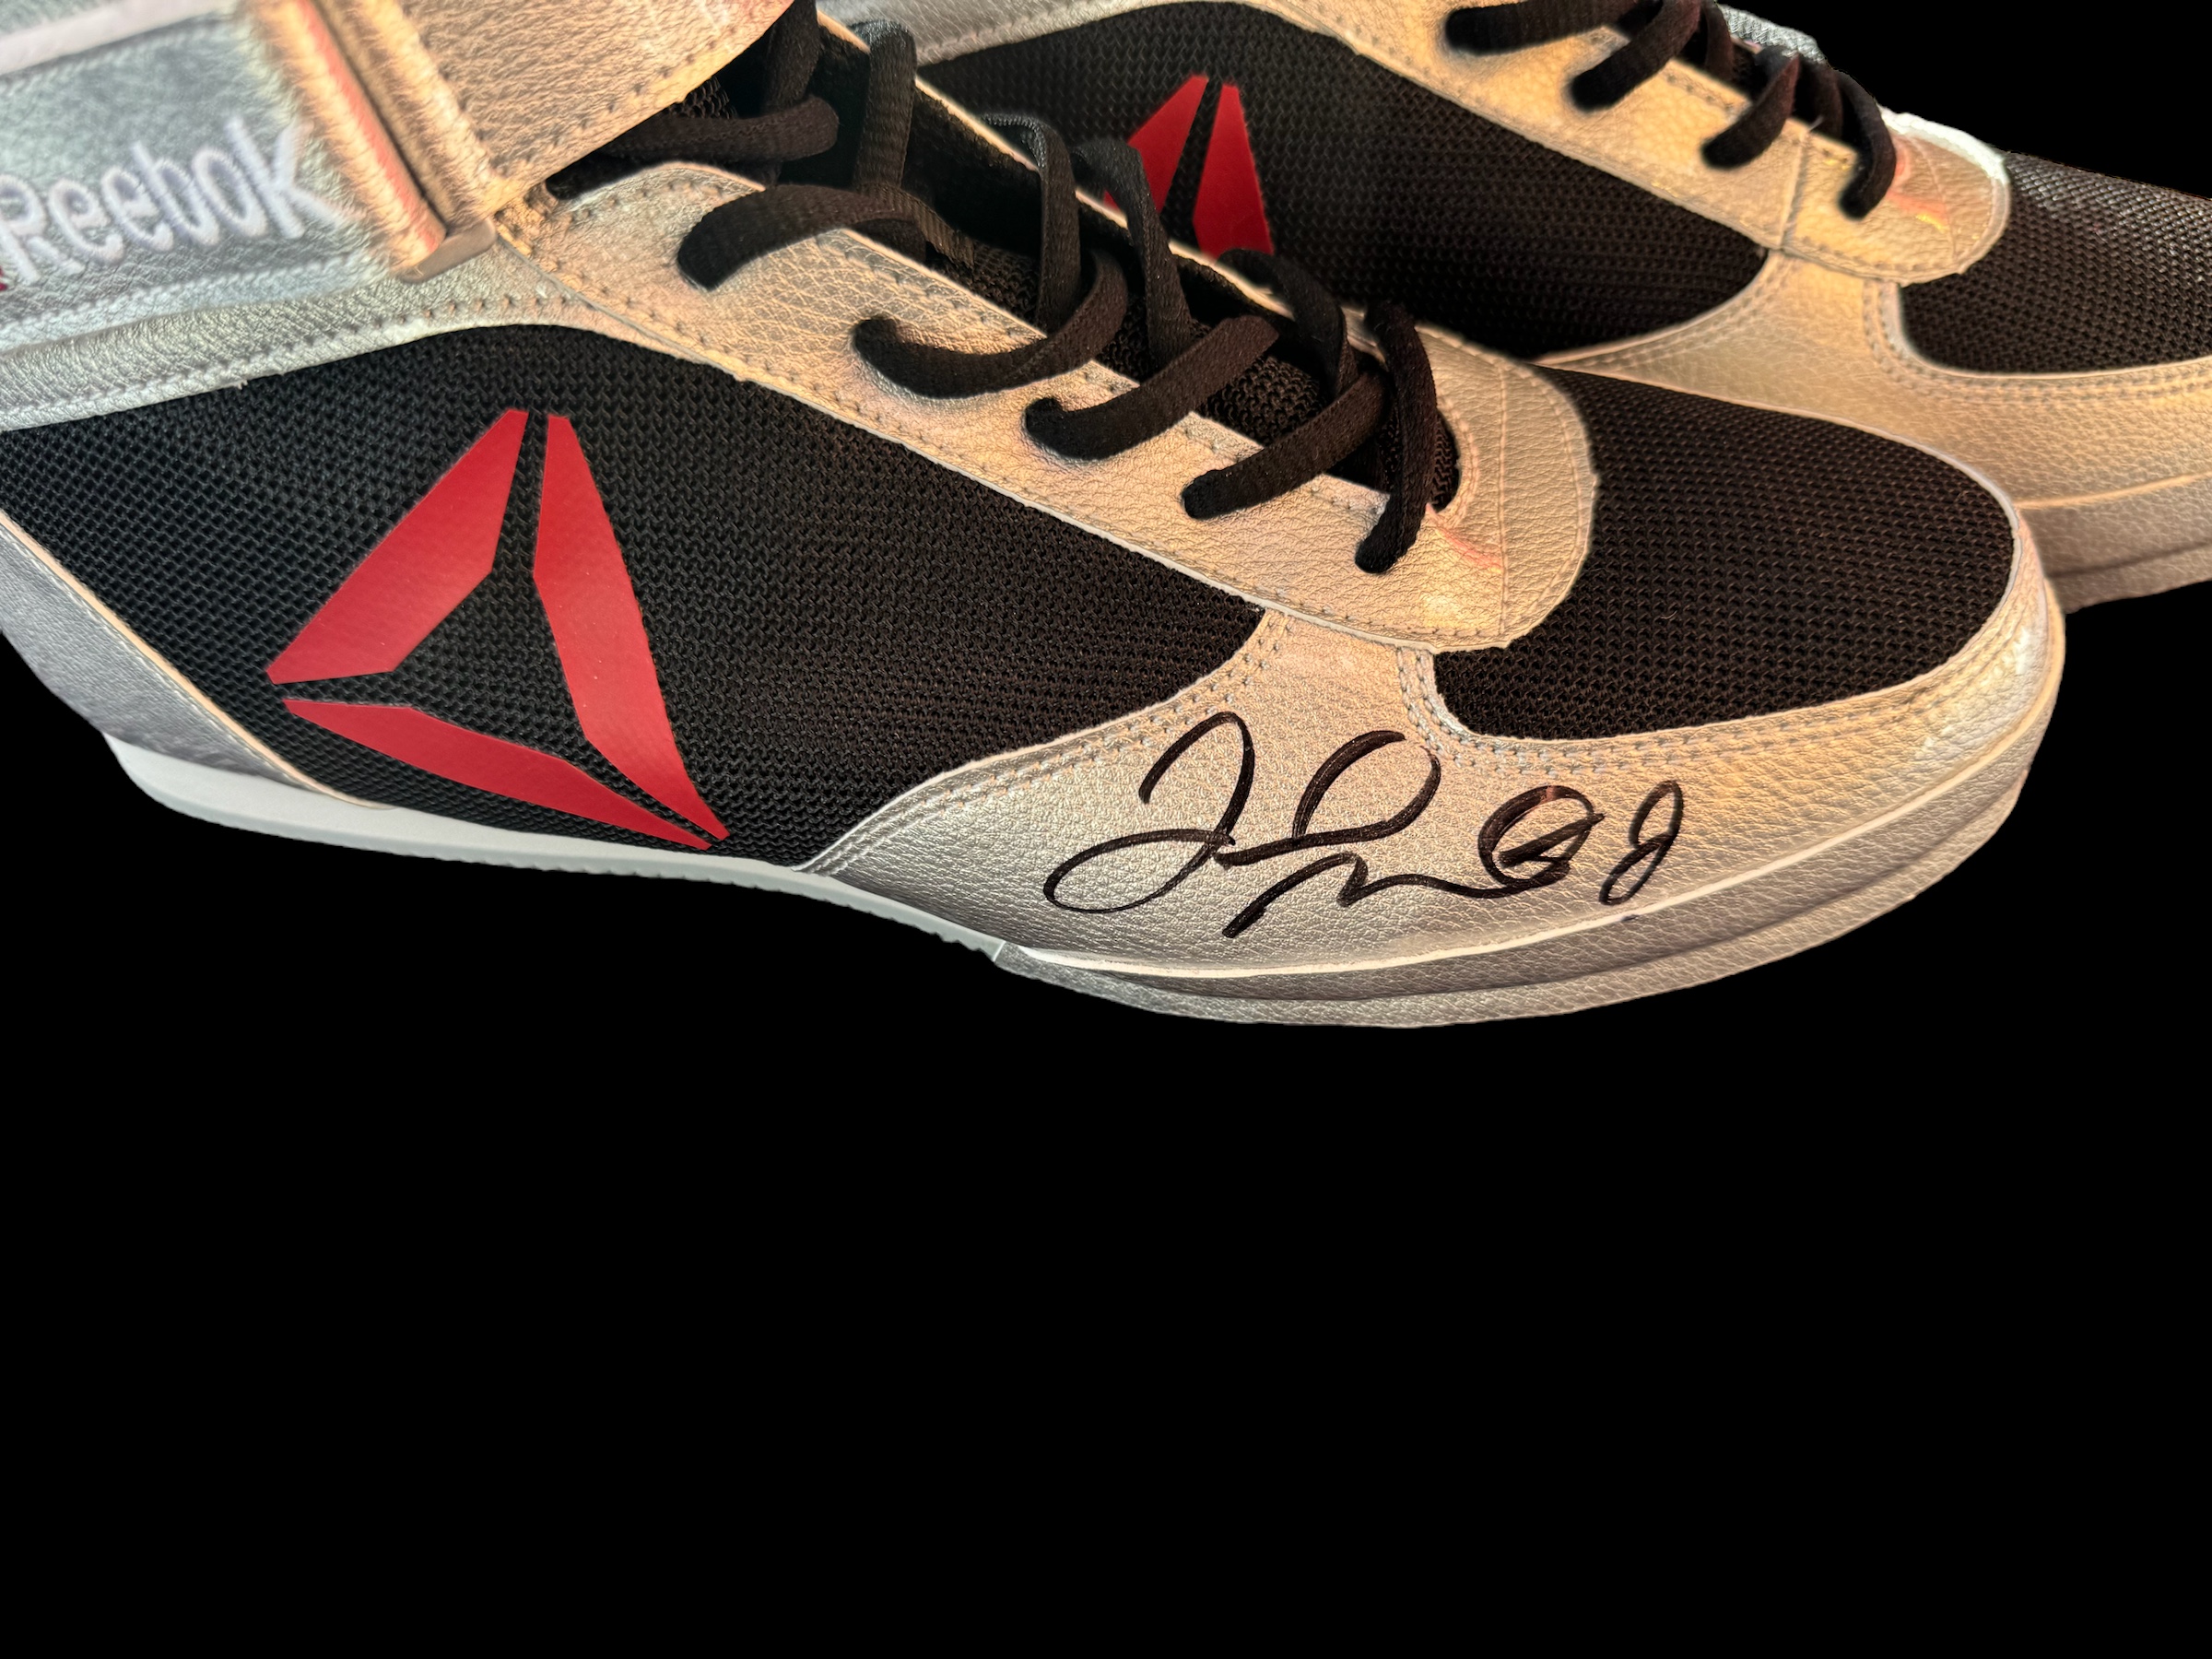 Floyd Mayweather Jnr signed Reebok boxing boots. (né Sinclair; born February 24, 1977) is an - Image 2 of 2